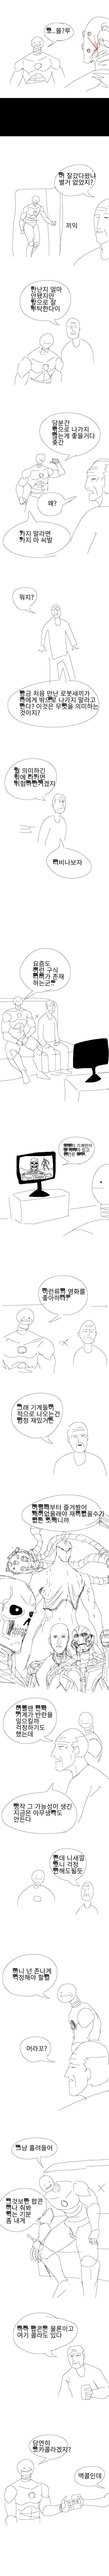 A reliable android cartoon that's good at kimchi stew.jpg